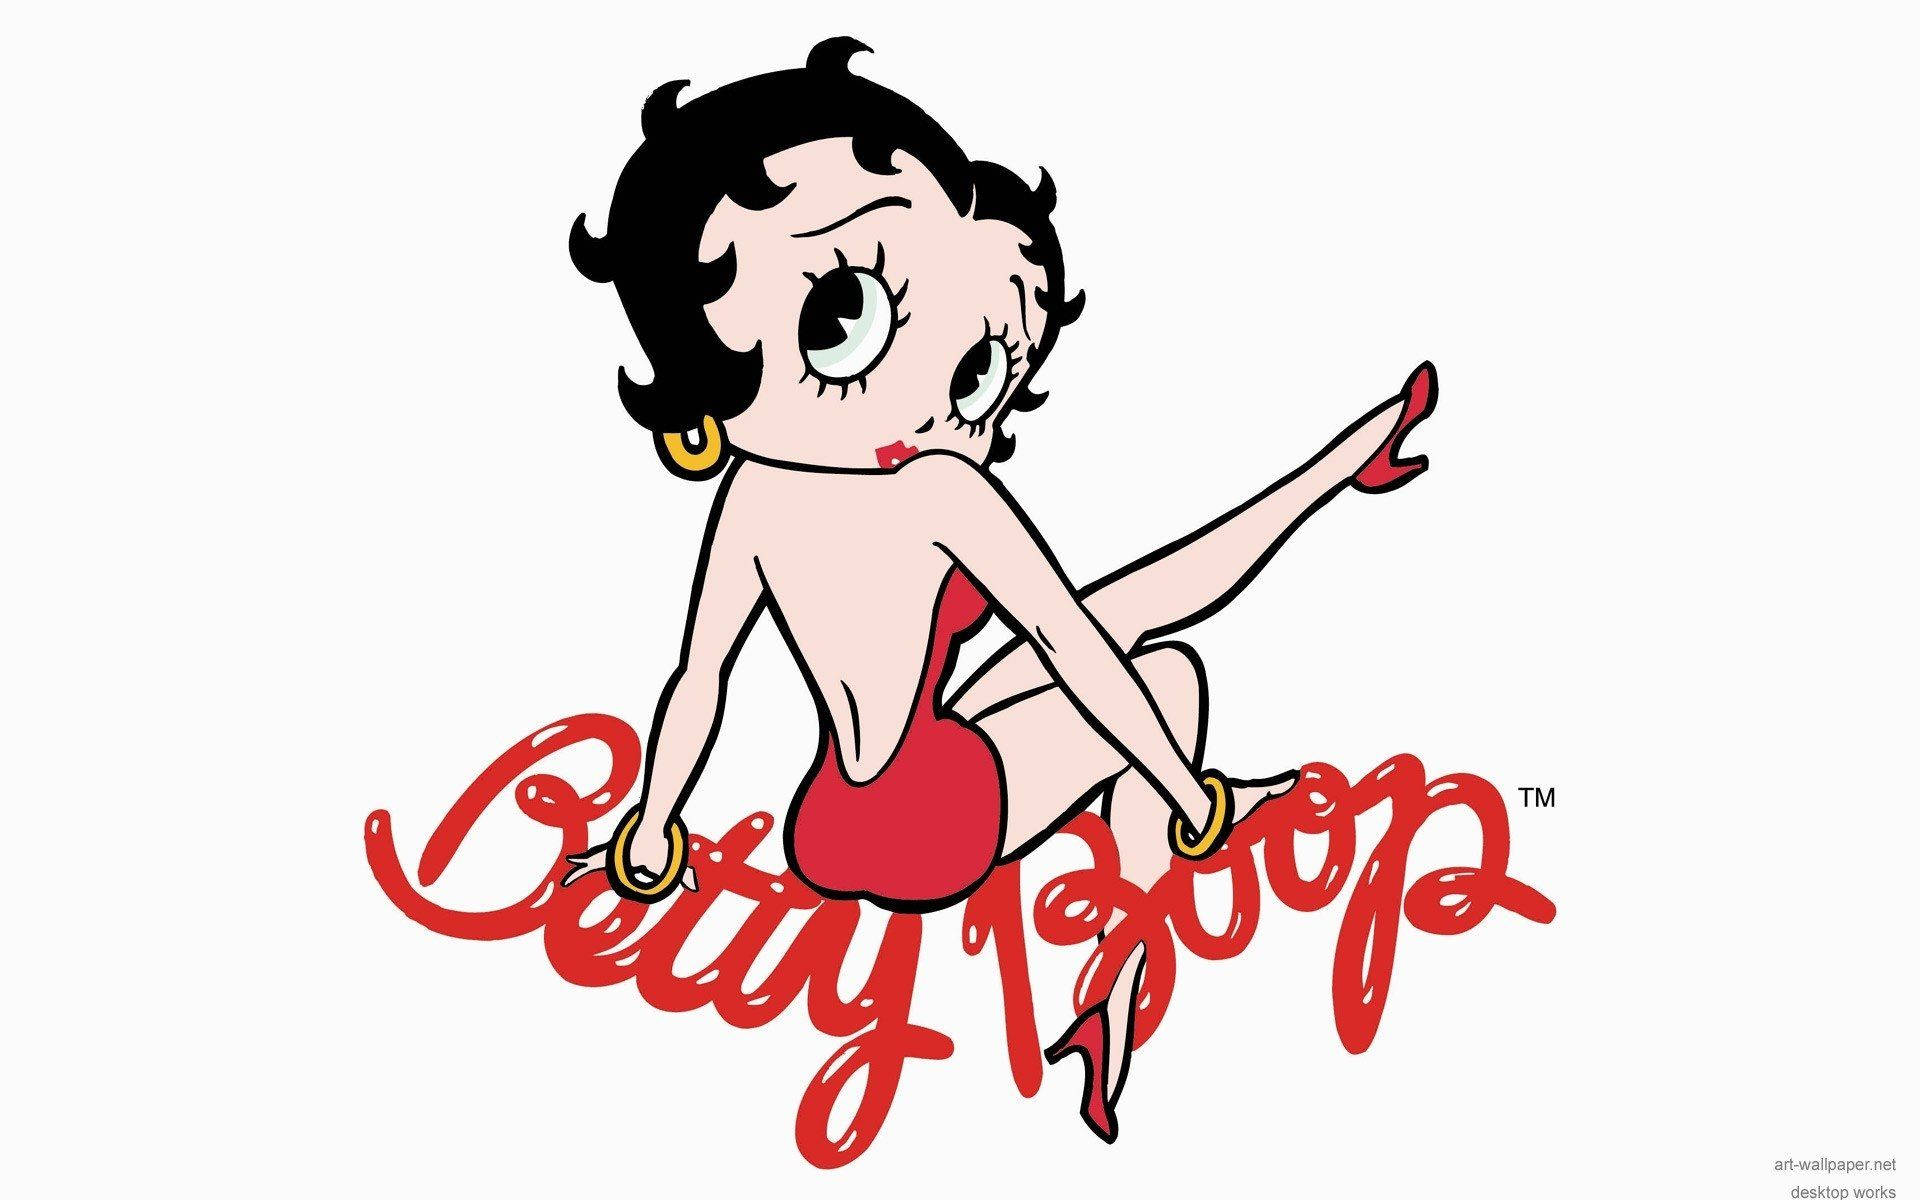 Top 999+ Betty Boop Wallpaper Full HD, 4K✅Free to Use